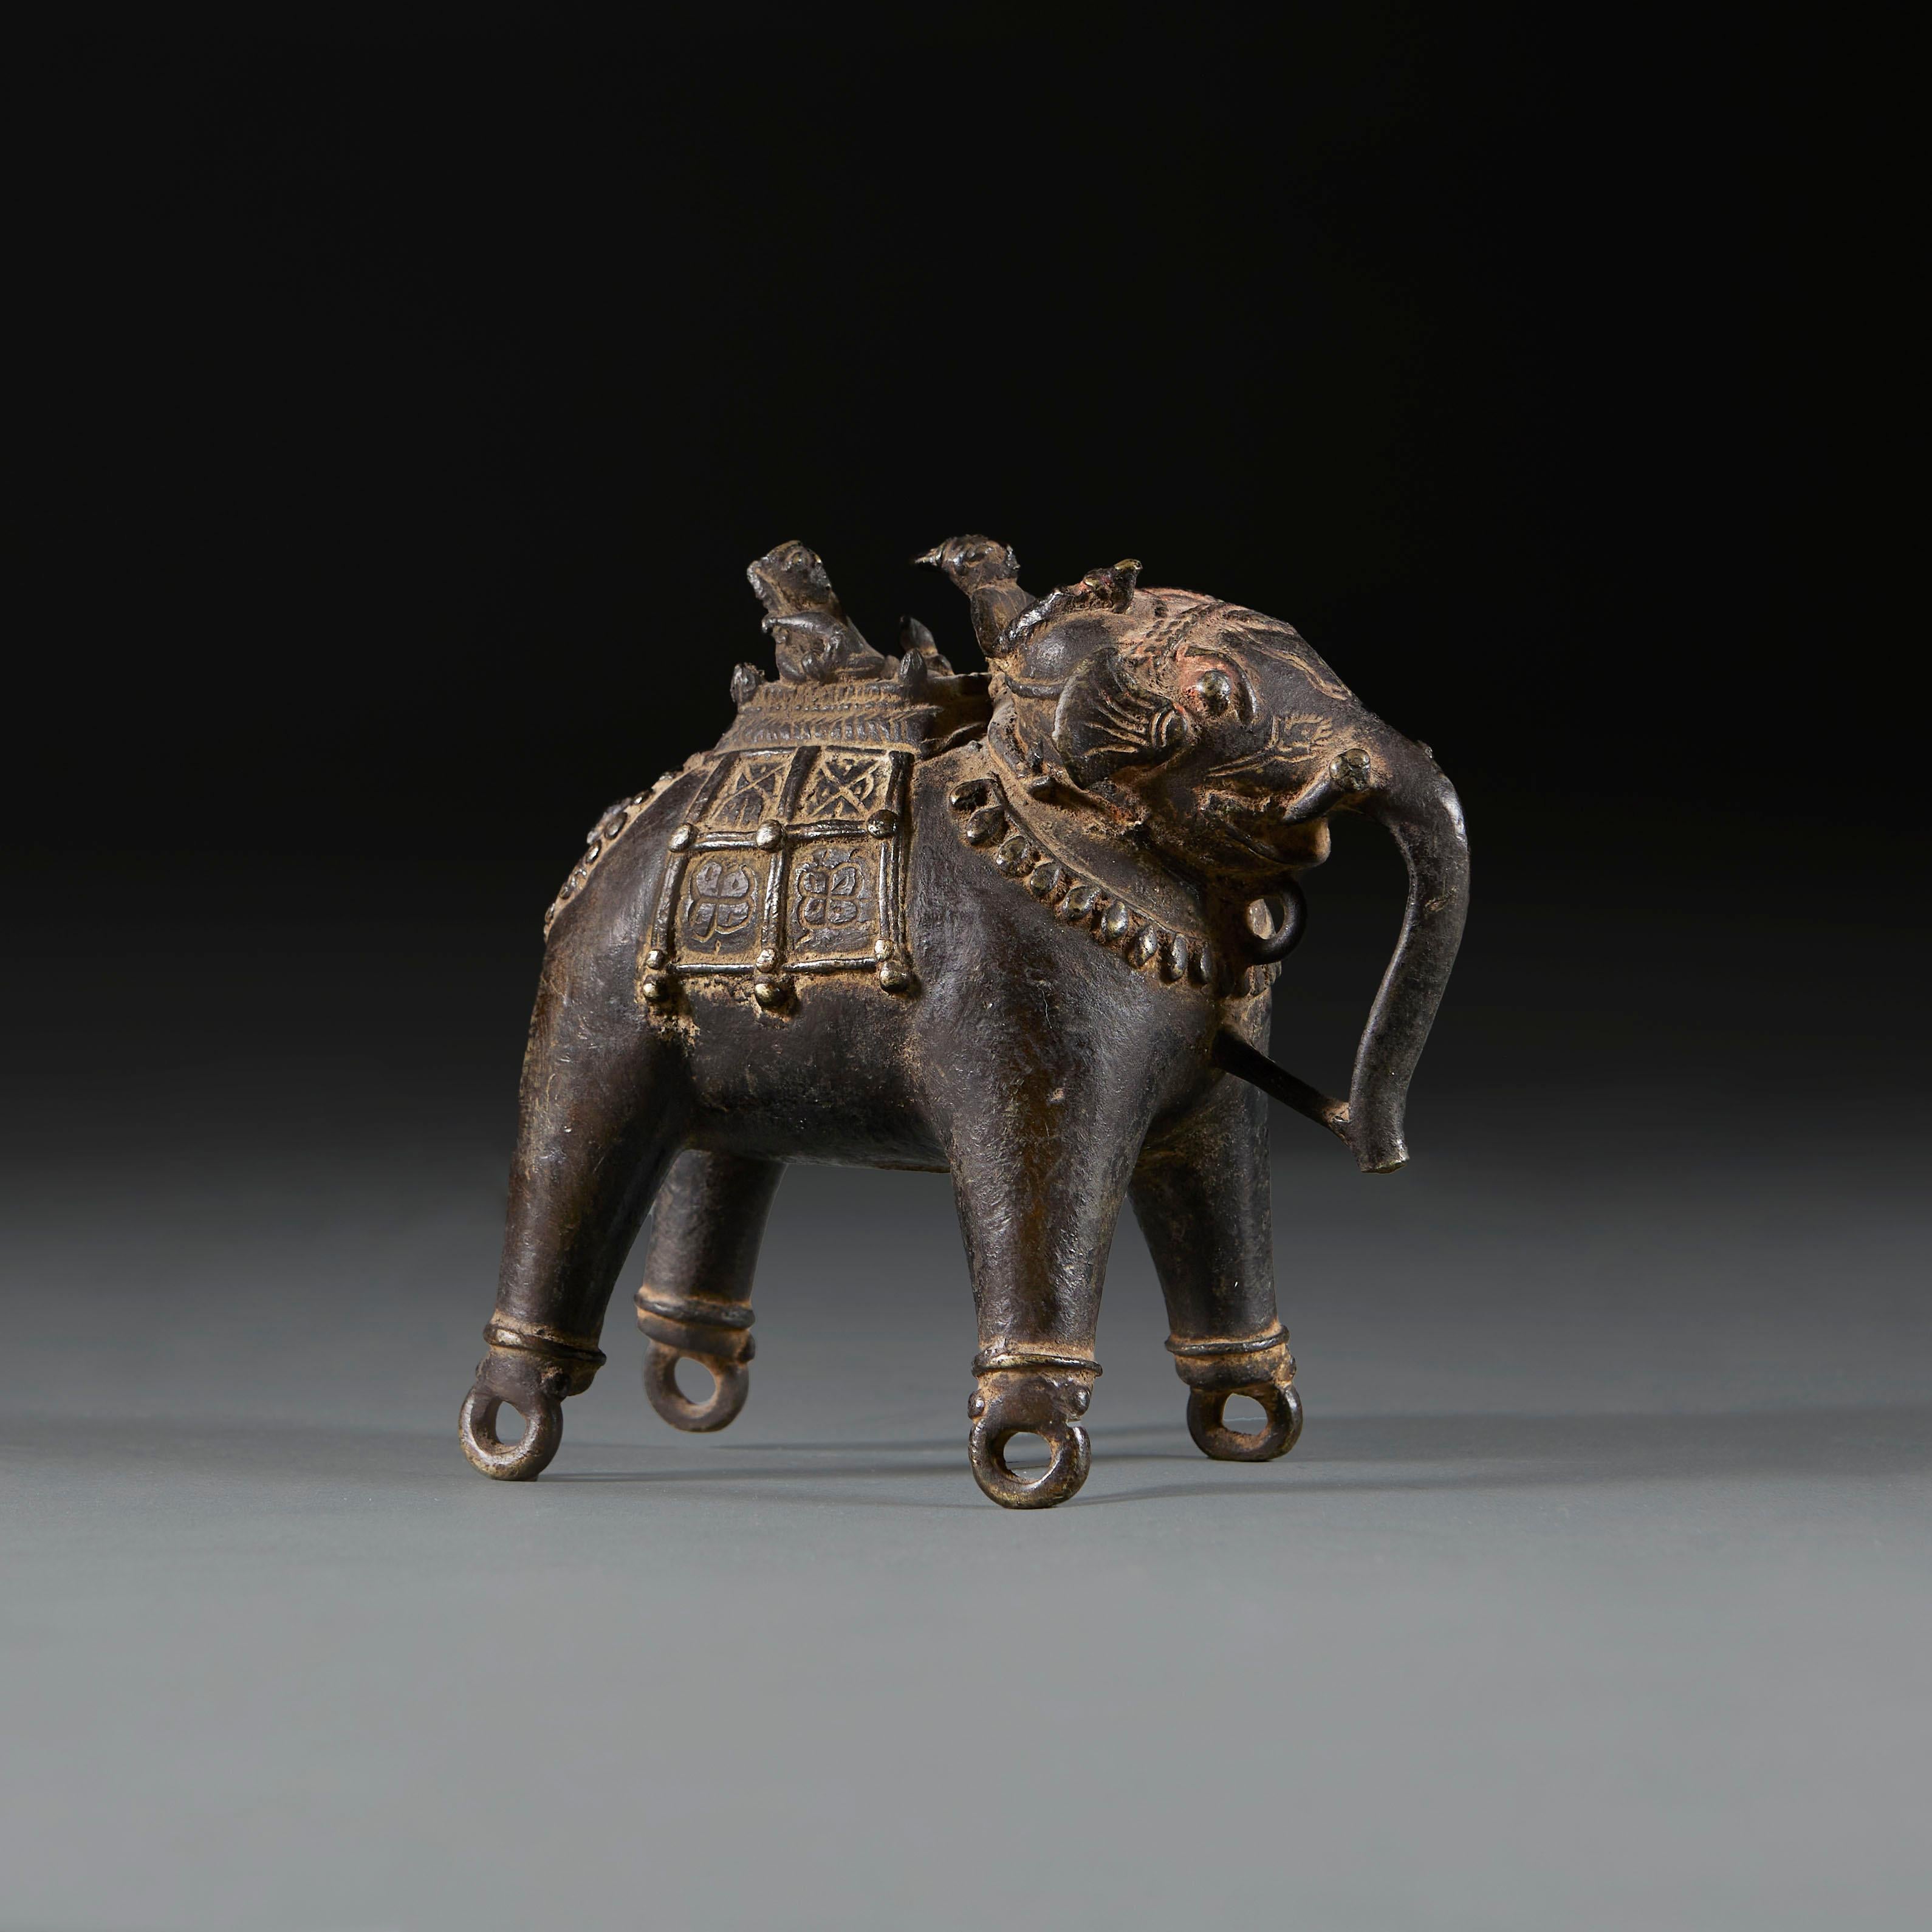 India, circa 1880

A nineteenth century solid bronze Indian elephant mounted by a Mahout carrying one passenger in a traditional howdah carriage, incised with decoration throughout and originally used as a toy. 

Height 15.00cm
Width 8.00cm
Depth